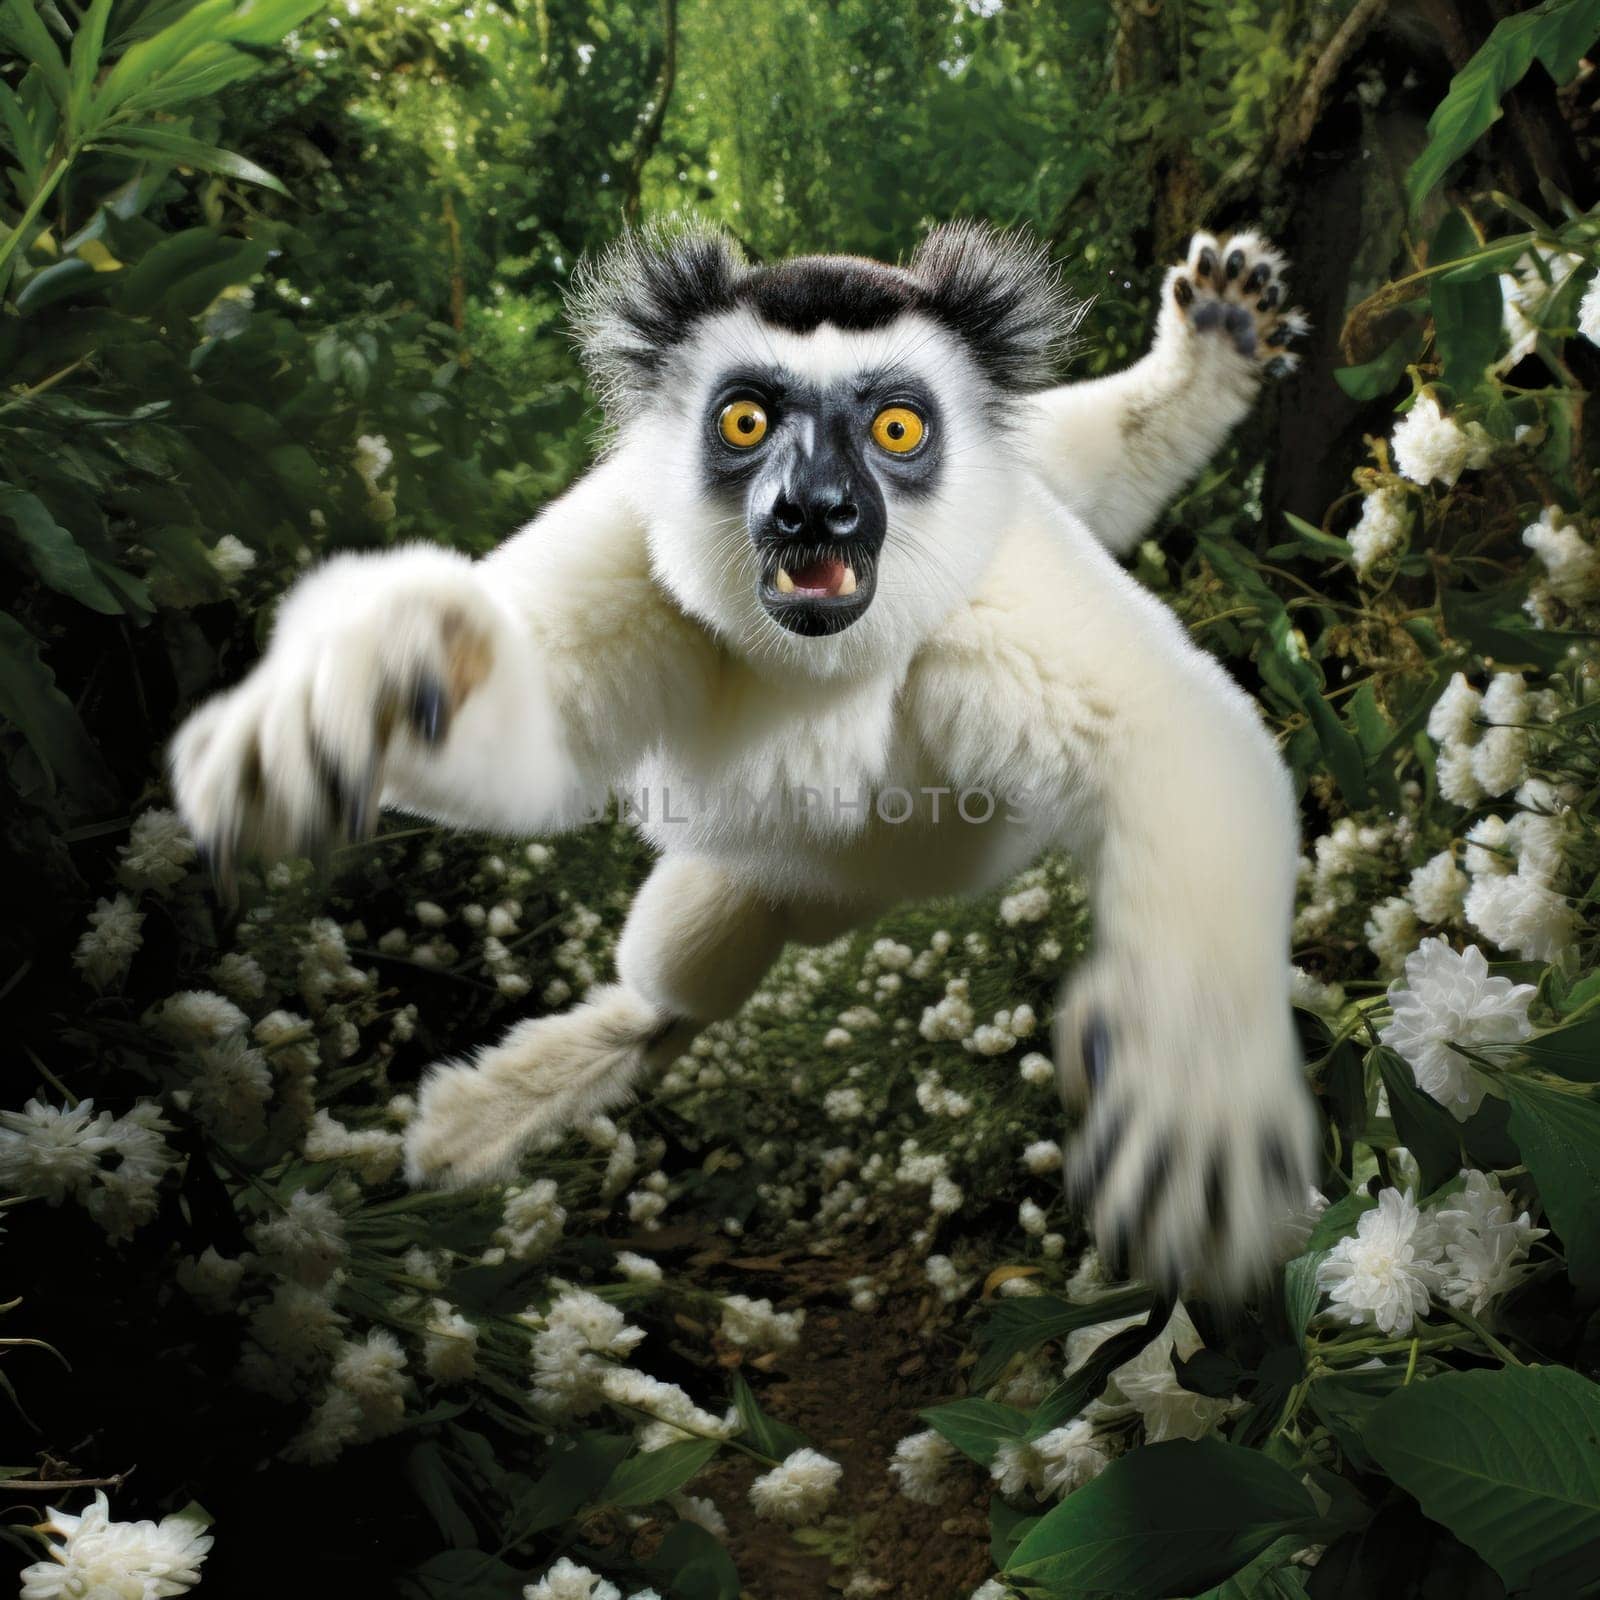 A lemur is running through a forest of flowers and leaves